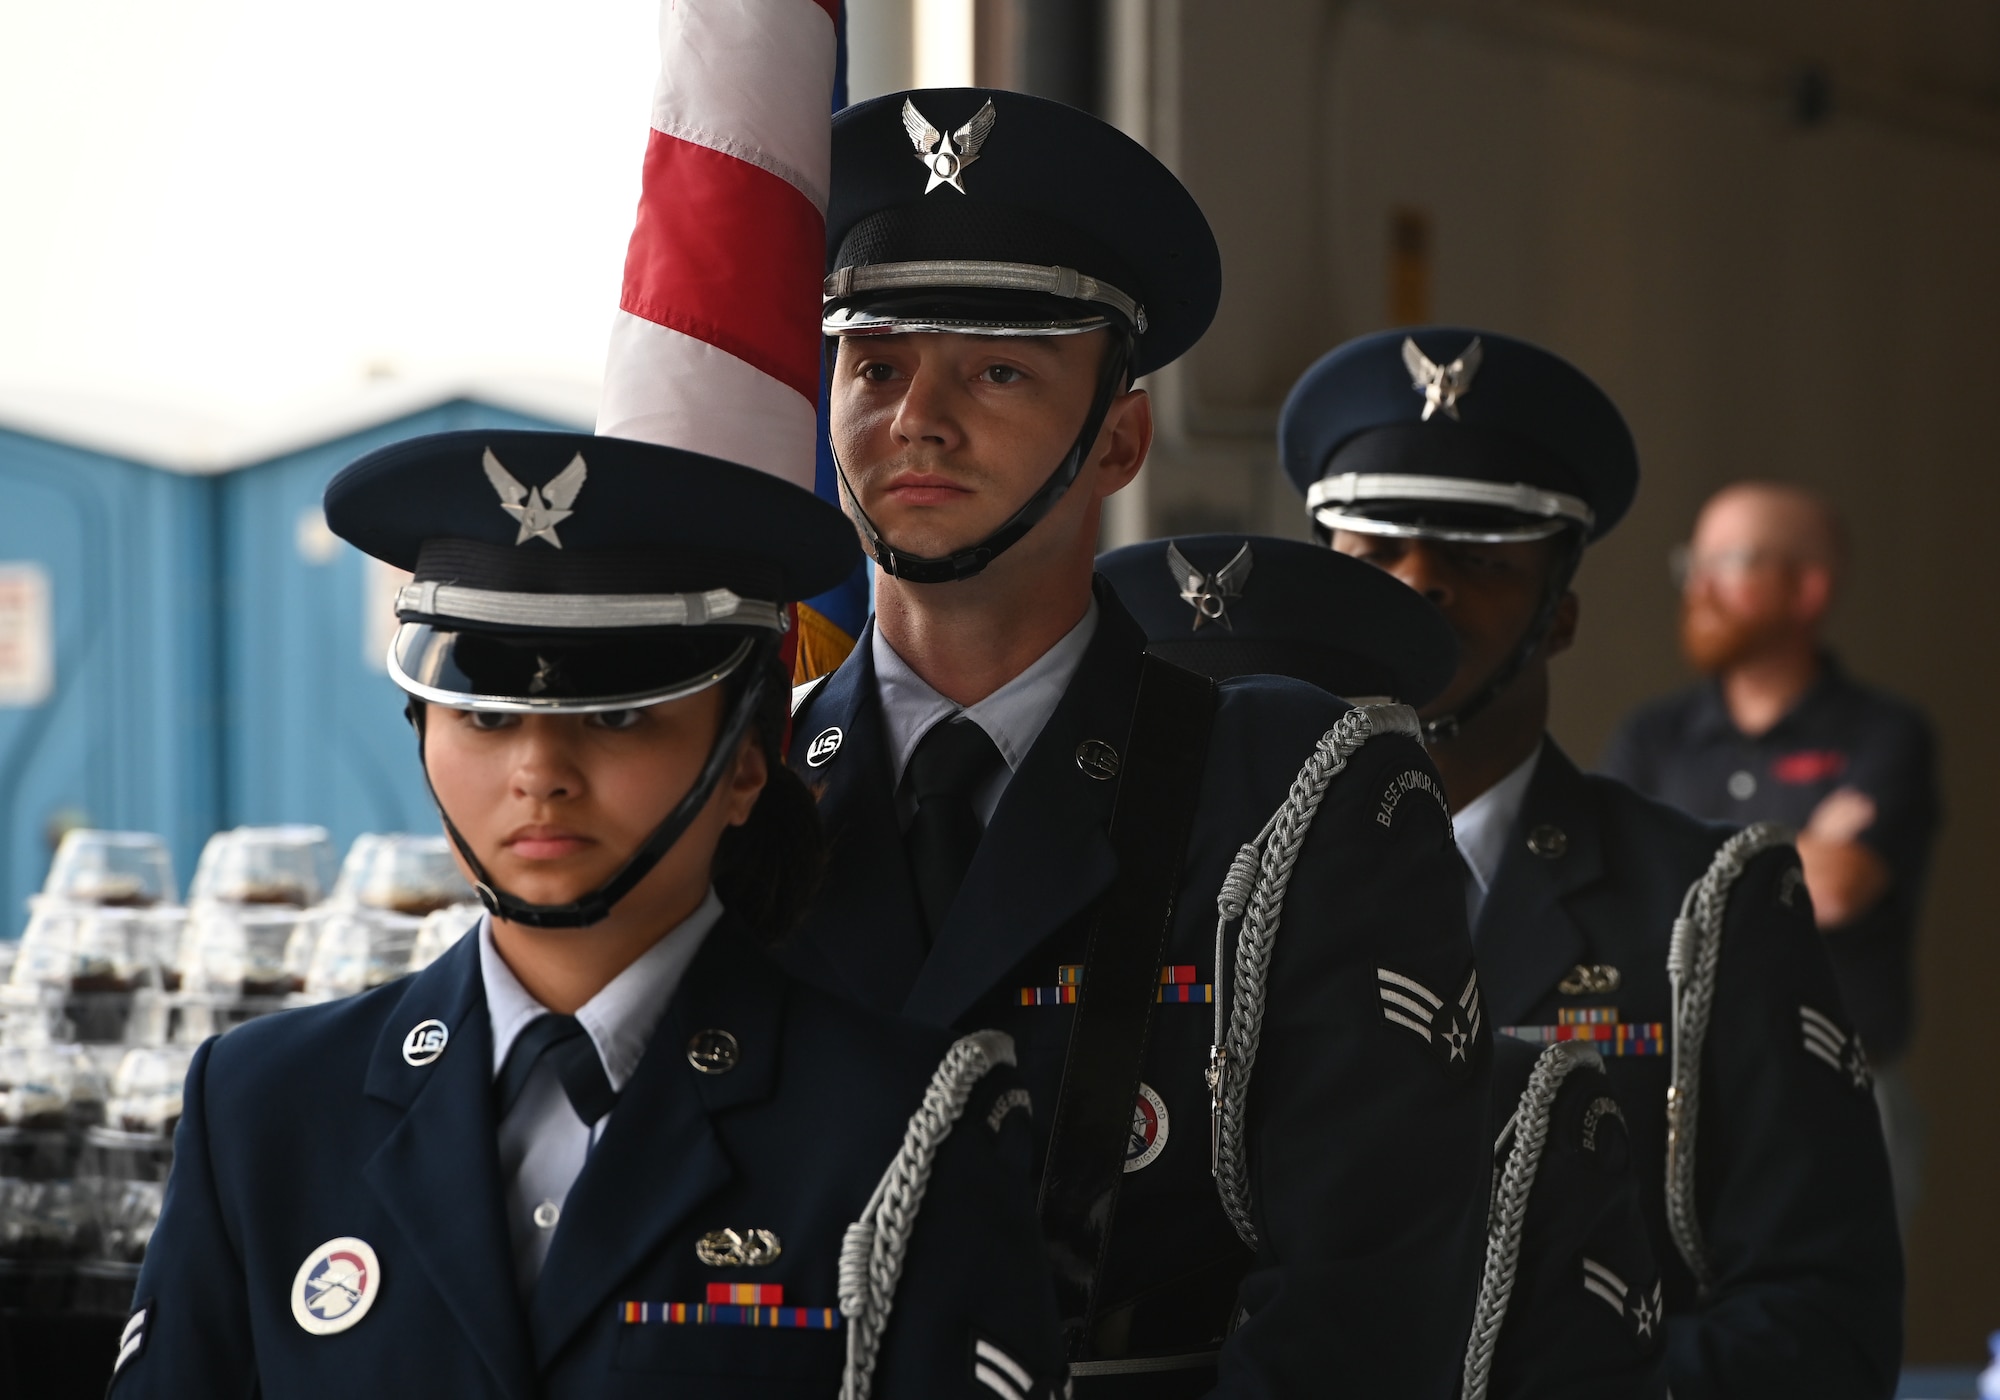 Members of Whiteman Honor Guard stand at the Air Force Ball at Whiteman Air Force Base, Missouri, September 16, 2022. This years AF Ball celebrates the 75th anniversary of the Air Force being established. (U.S. Air Force photo by Airman 1st Class Joseph Garcia)